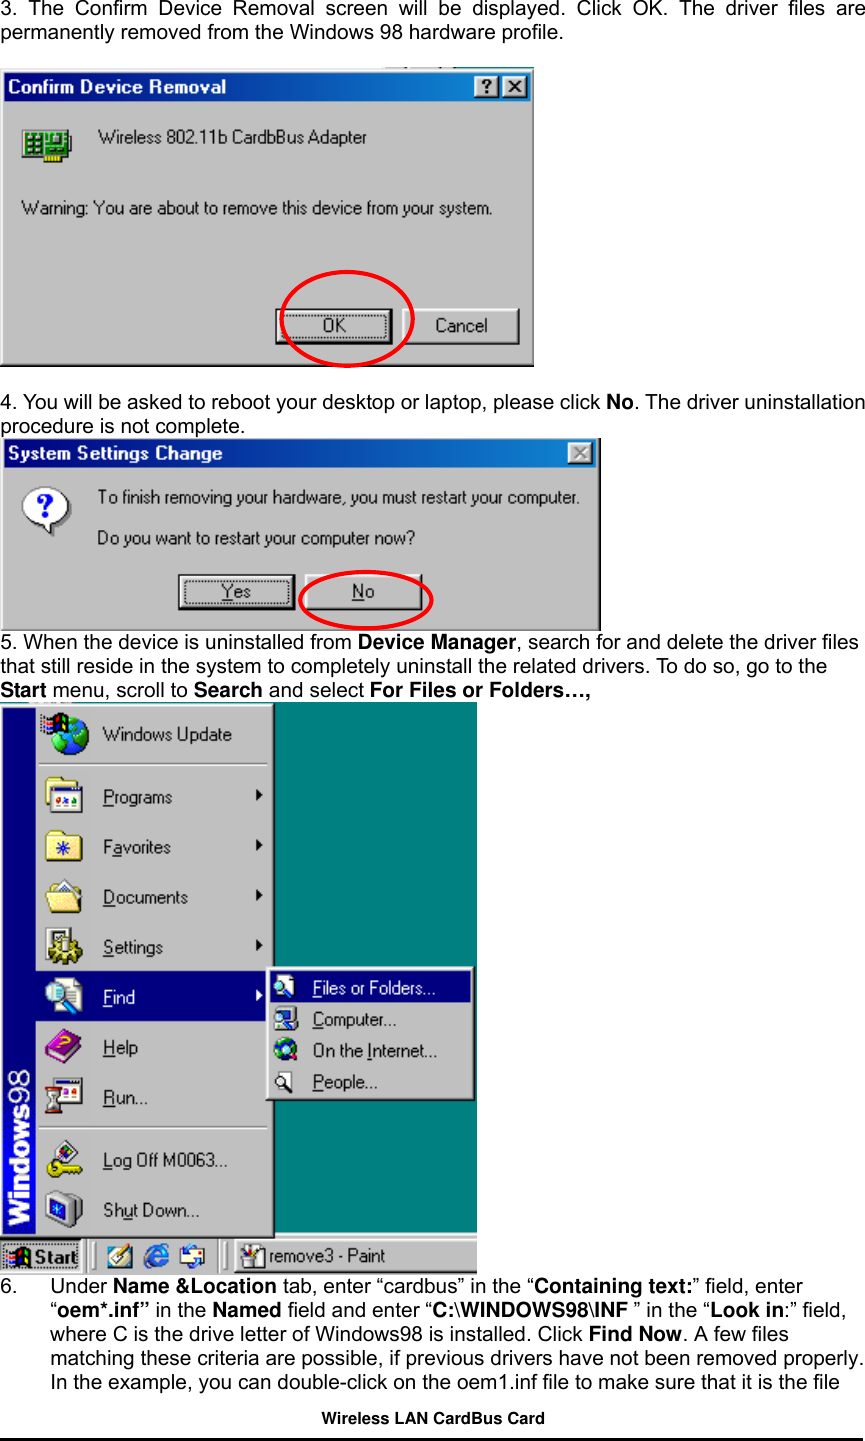  3. The Confirm Device Removal screen will be displayed. Click OK. The driver files are permanently removed from the Windows 98 hardware profile.      4. You will be asked to reboot your desktop or laptop, please click No. The driver uninstallation procedure is not complete.  5. When the device is uninstalled from Device Manager, search for and delete the driver files that still reside in the system to completely uninstall the related drivers. To do so, go to the Start menu, scroll to Search and select For Files or Folders…,  6. Under Name &amp;Location tab, enter “cardbus” in the “Containing text:” field, enter “oem*.inf” in the Named field and enter “C:\WINDOWS98\INF ” in the “Look in:” field, where C is the drive letter of Windows98 is installed. Click Find Now. A few files matching these criteria are possible, if previous drivers have not been removed properly. In the example, you can double-click on the oem1.inf file to make sure that it is the file Wireless LAN CardBus Card 